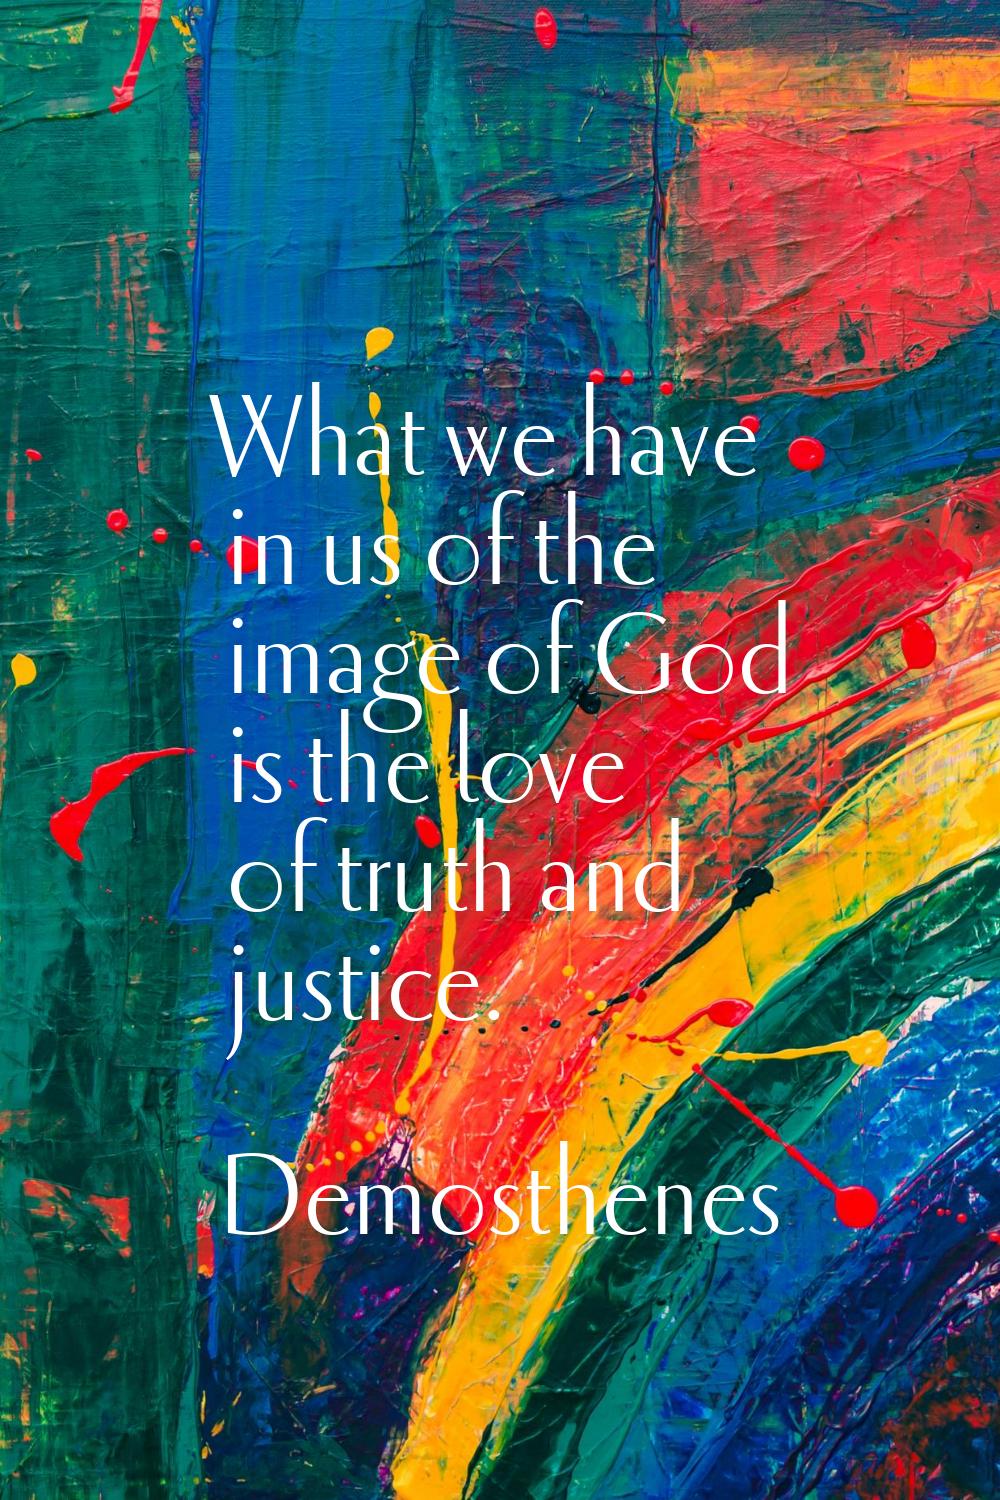 What we have in us of the image of God is the love of truth and justice.